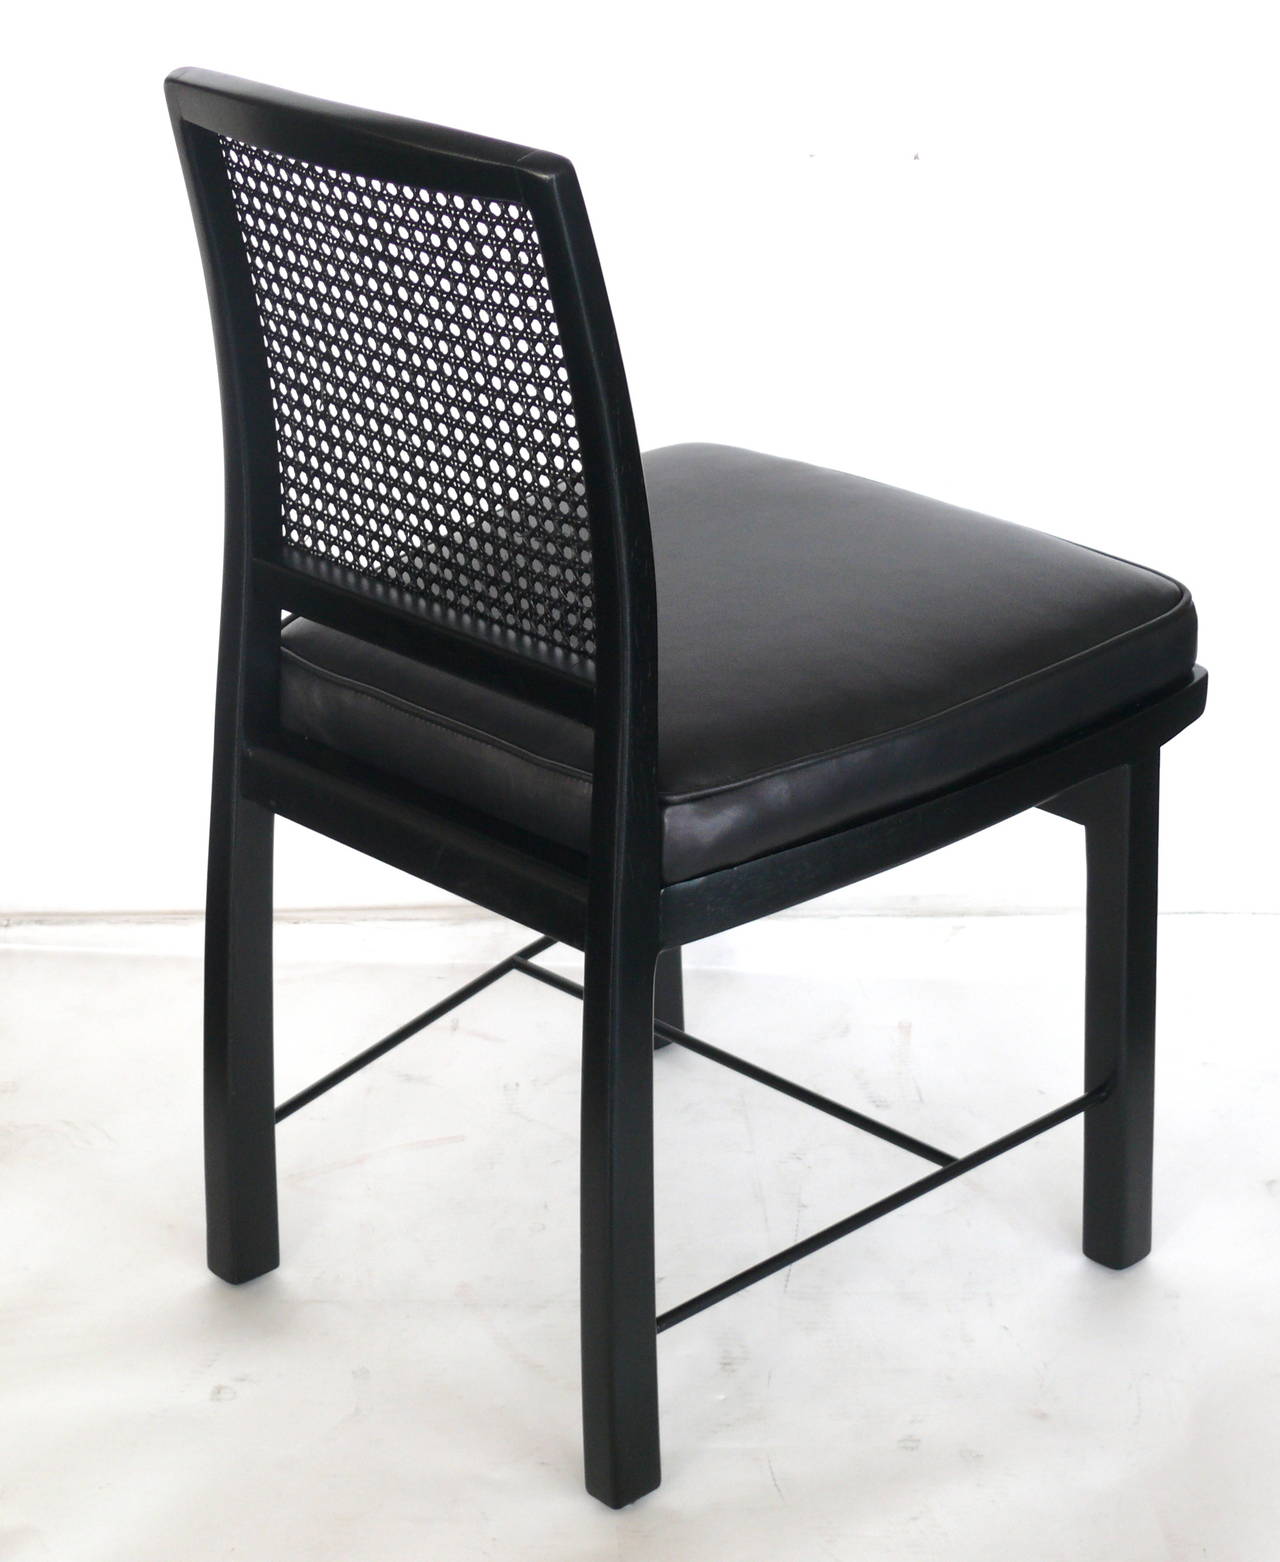 Handsome set of Edward Wormley for Dunbar side chairs. Jet black chair frames complimented by caned back detail. Seats have been newly upholstered in a black lamb skin. Two chairs available. Priced individually.